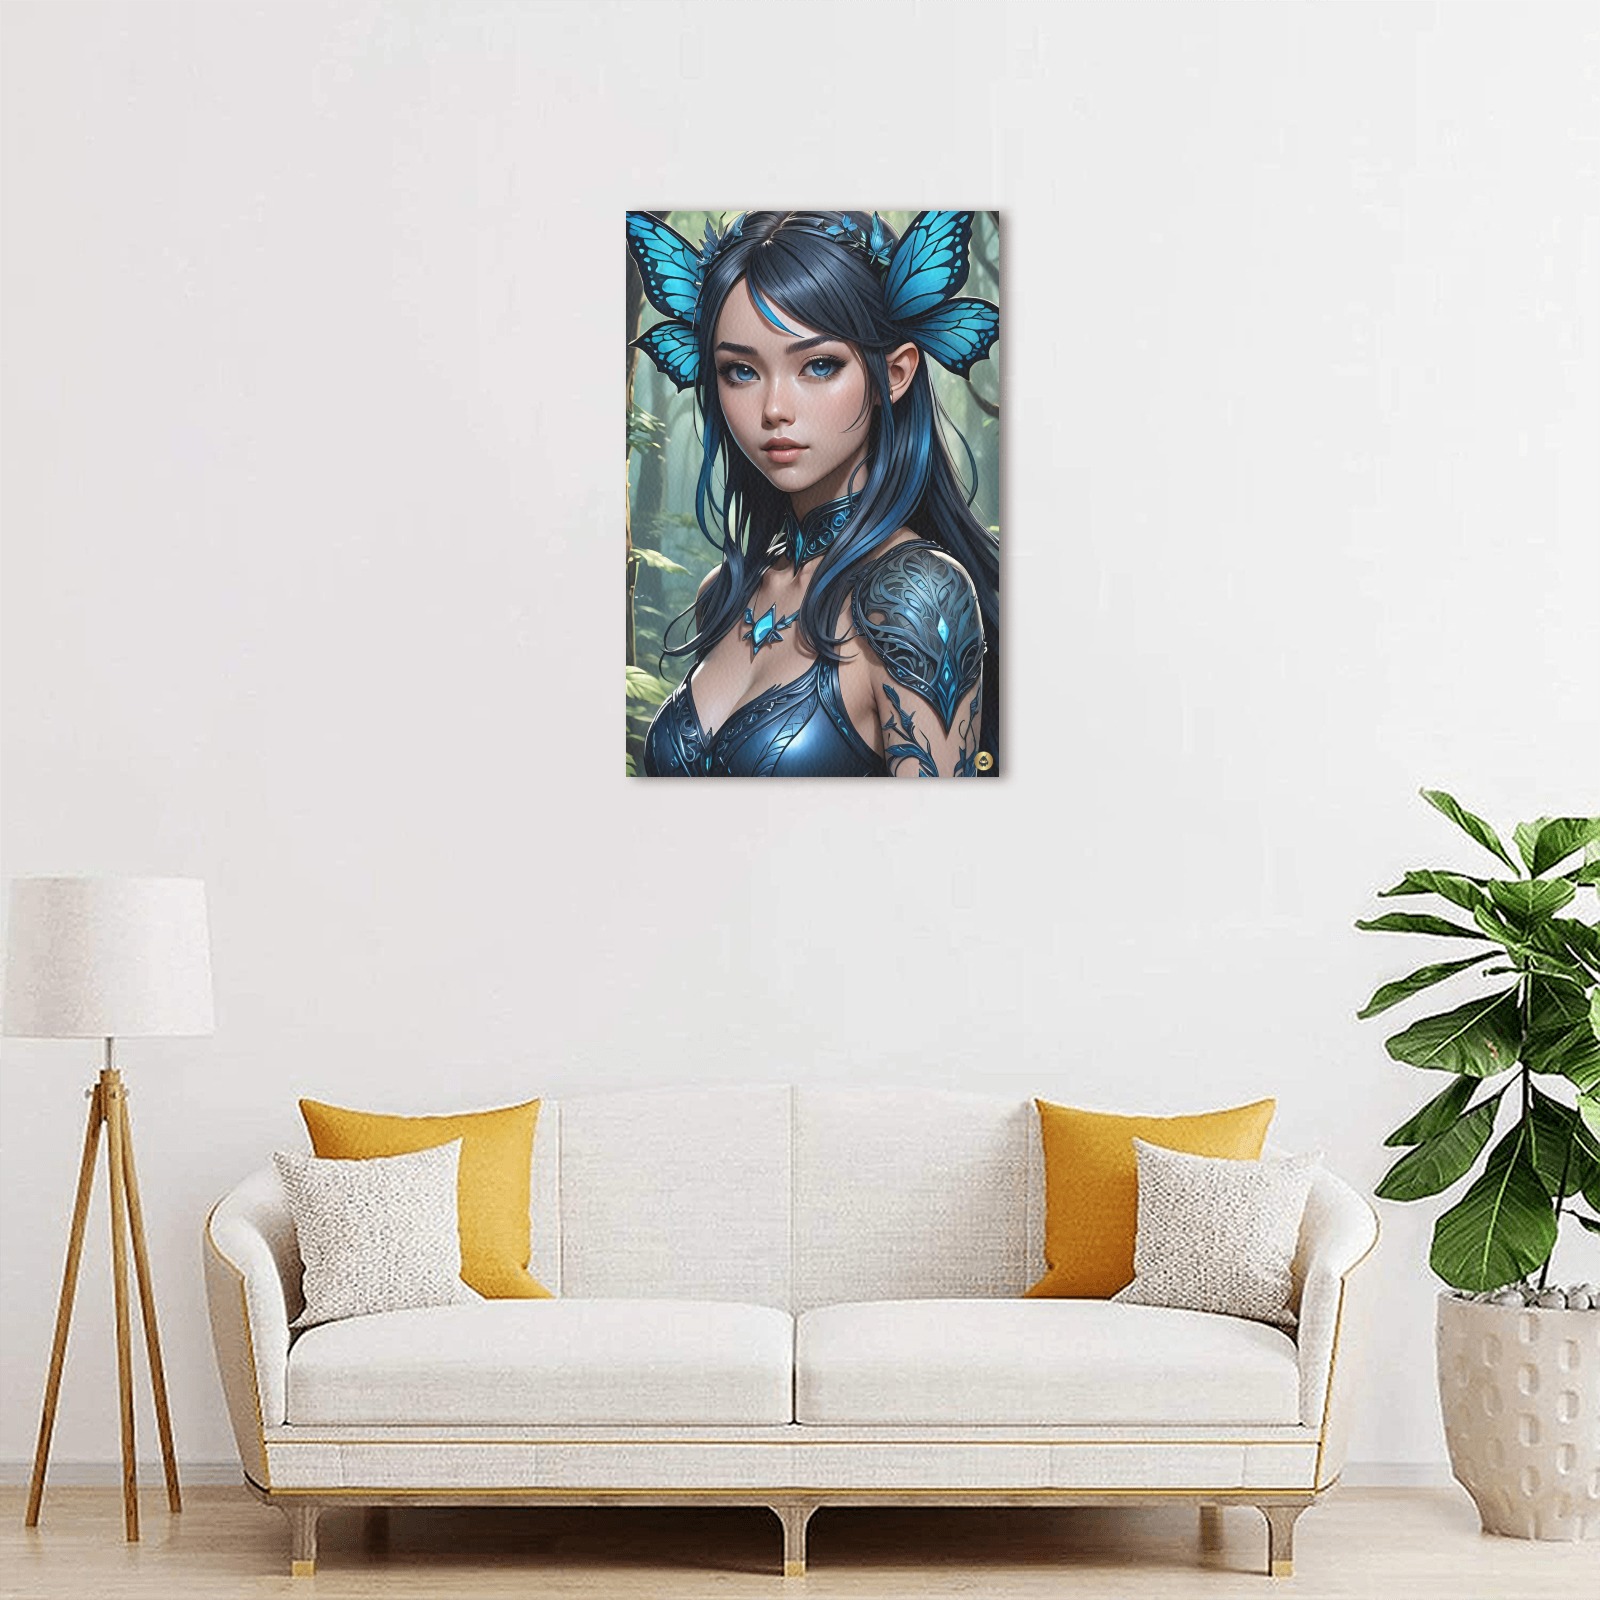 FOREST FAIRY - BLUE #1 Upgraded Canvas Print 12"x18"